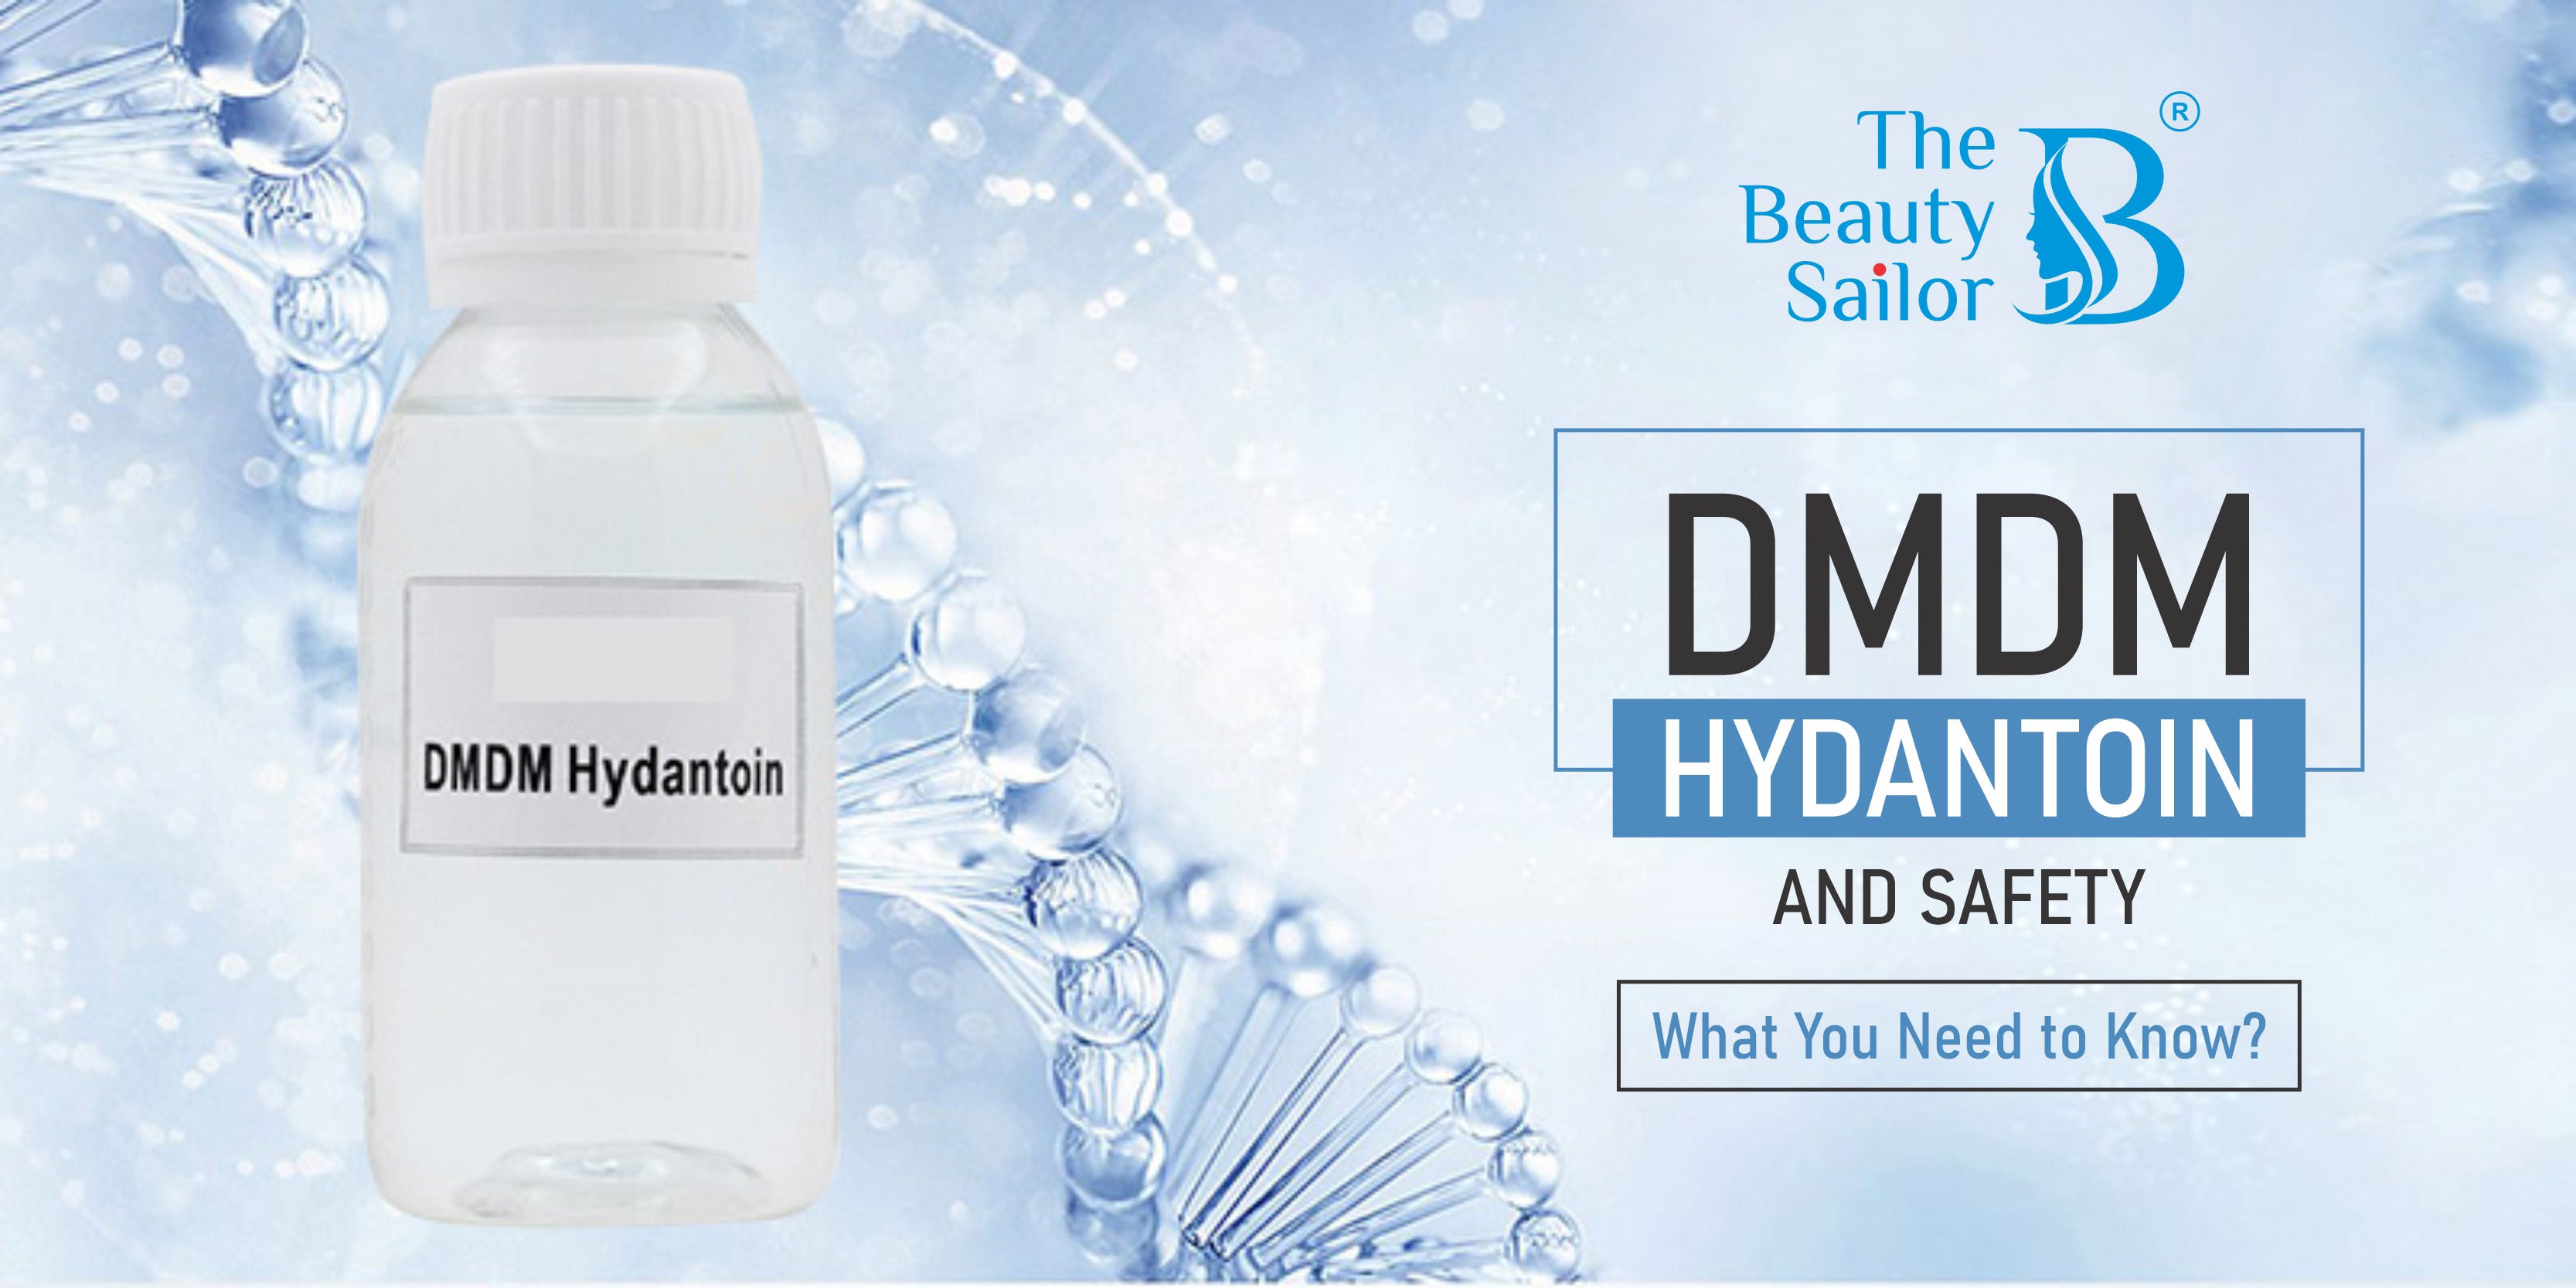 DMDM Hydantoin and Safety: What You Need to Know